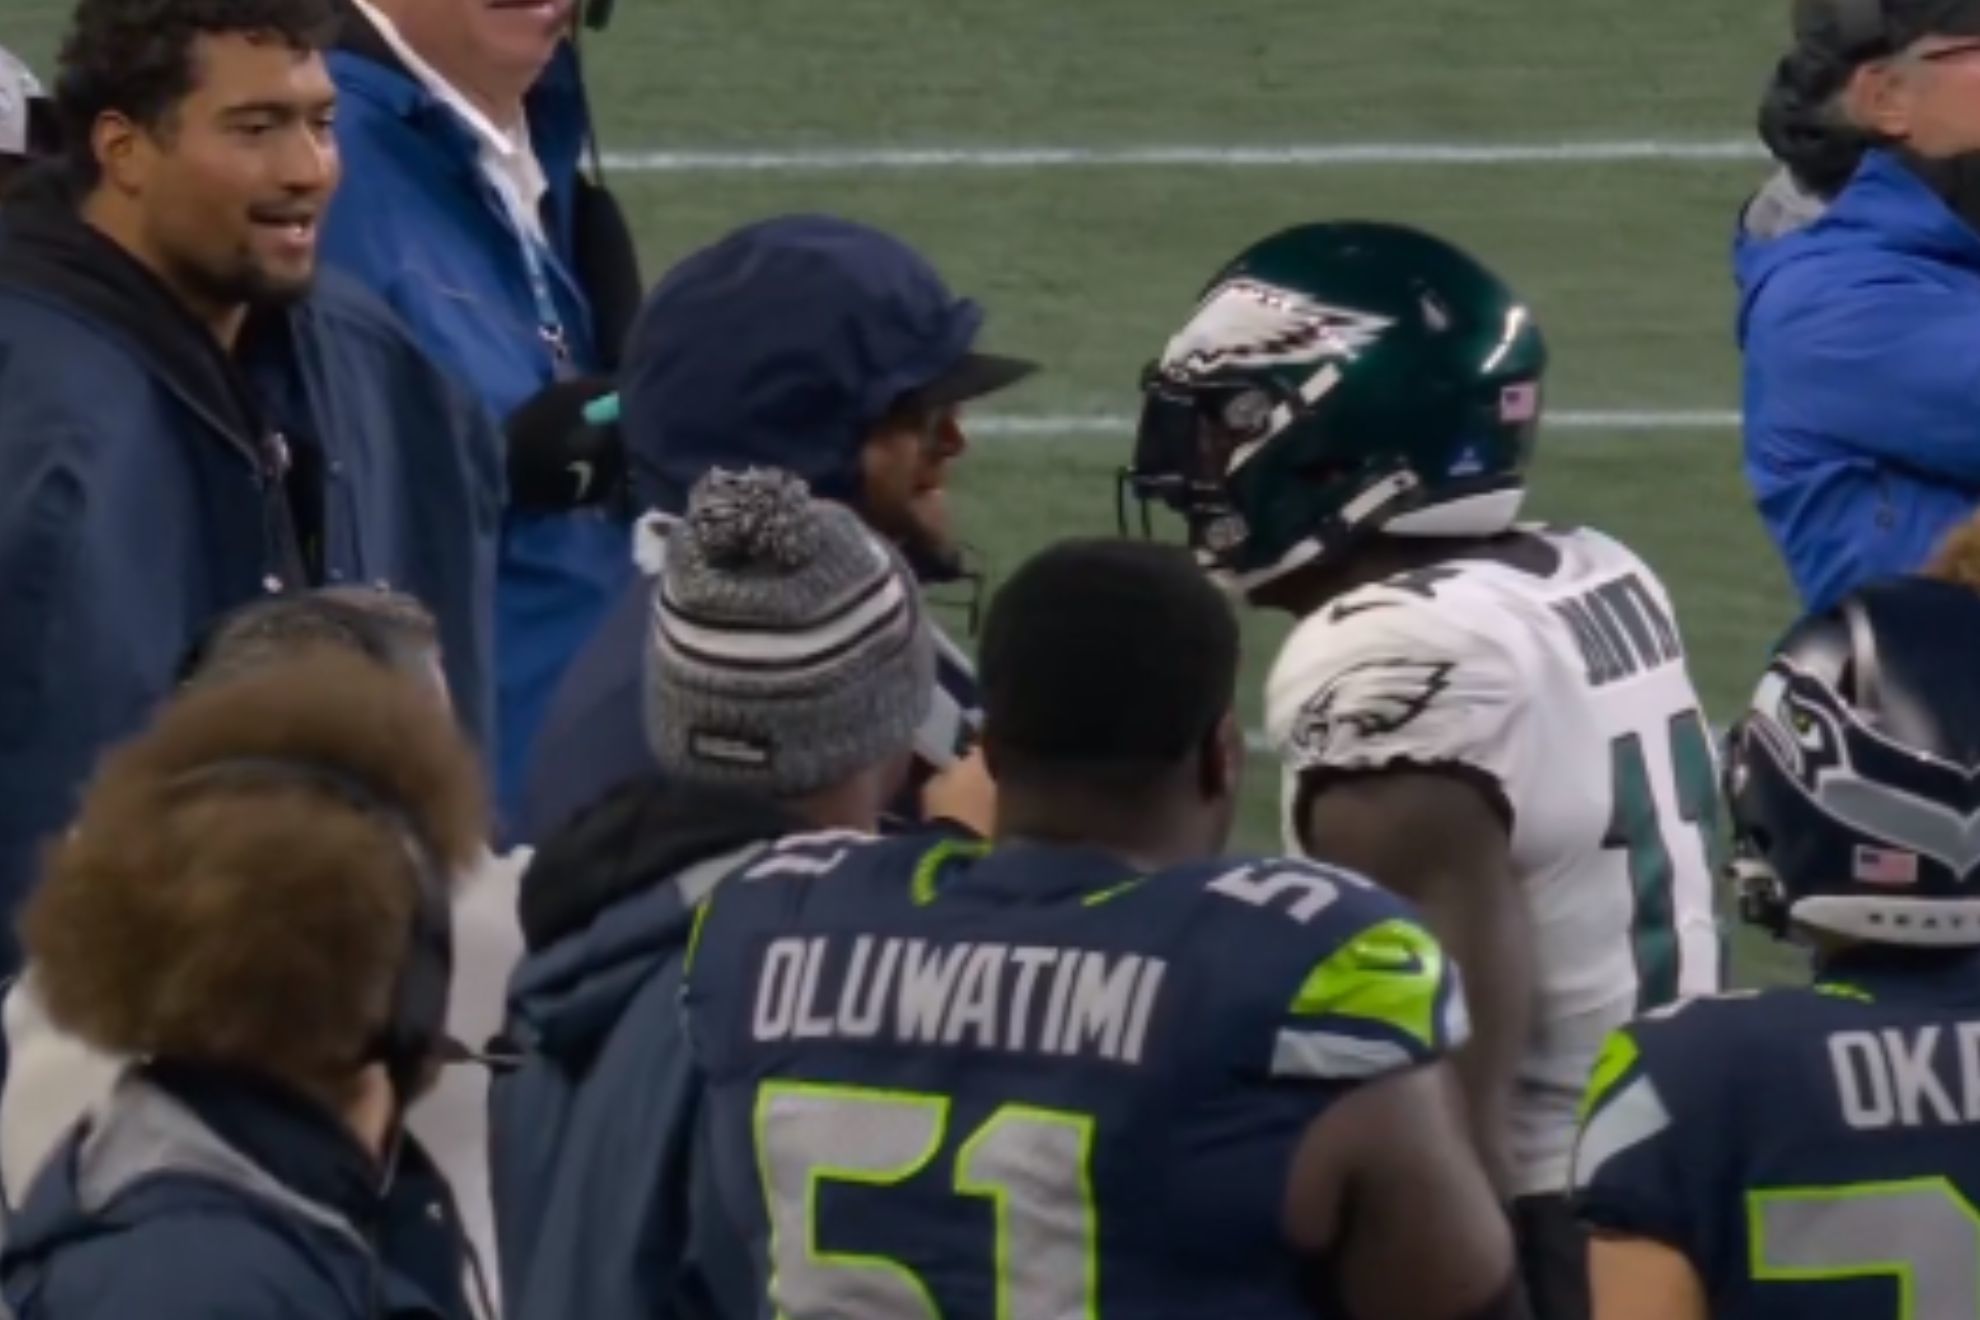 Seahawks personnel bumps AJ Brown on sideline, avoids ejection as Big Dom observes